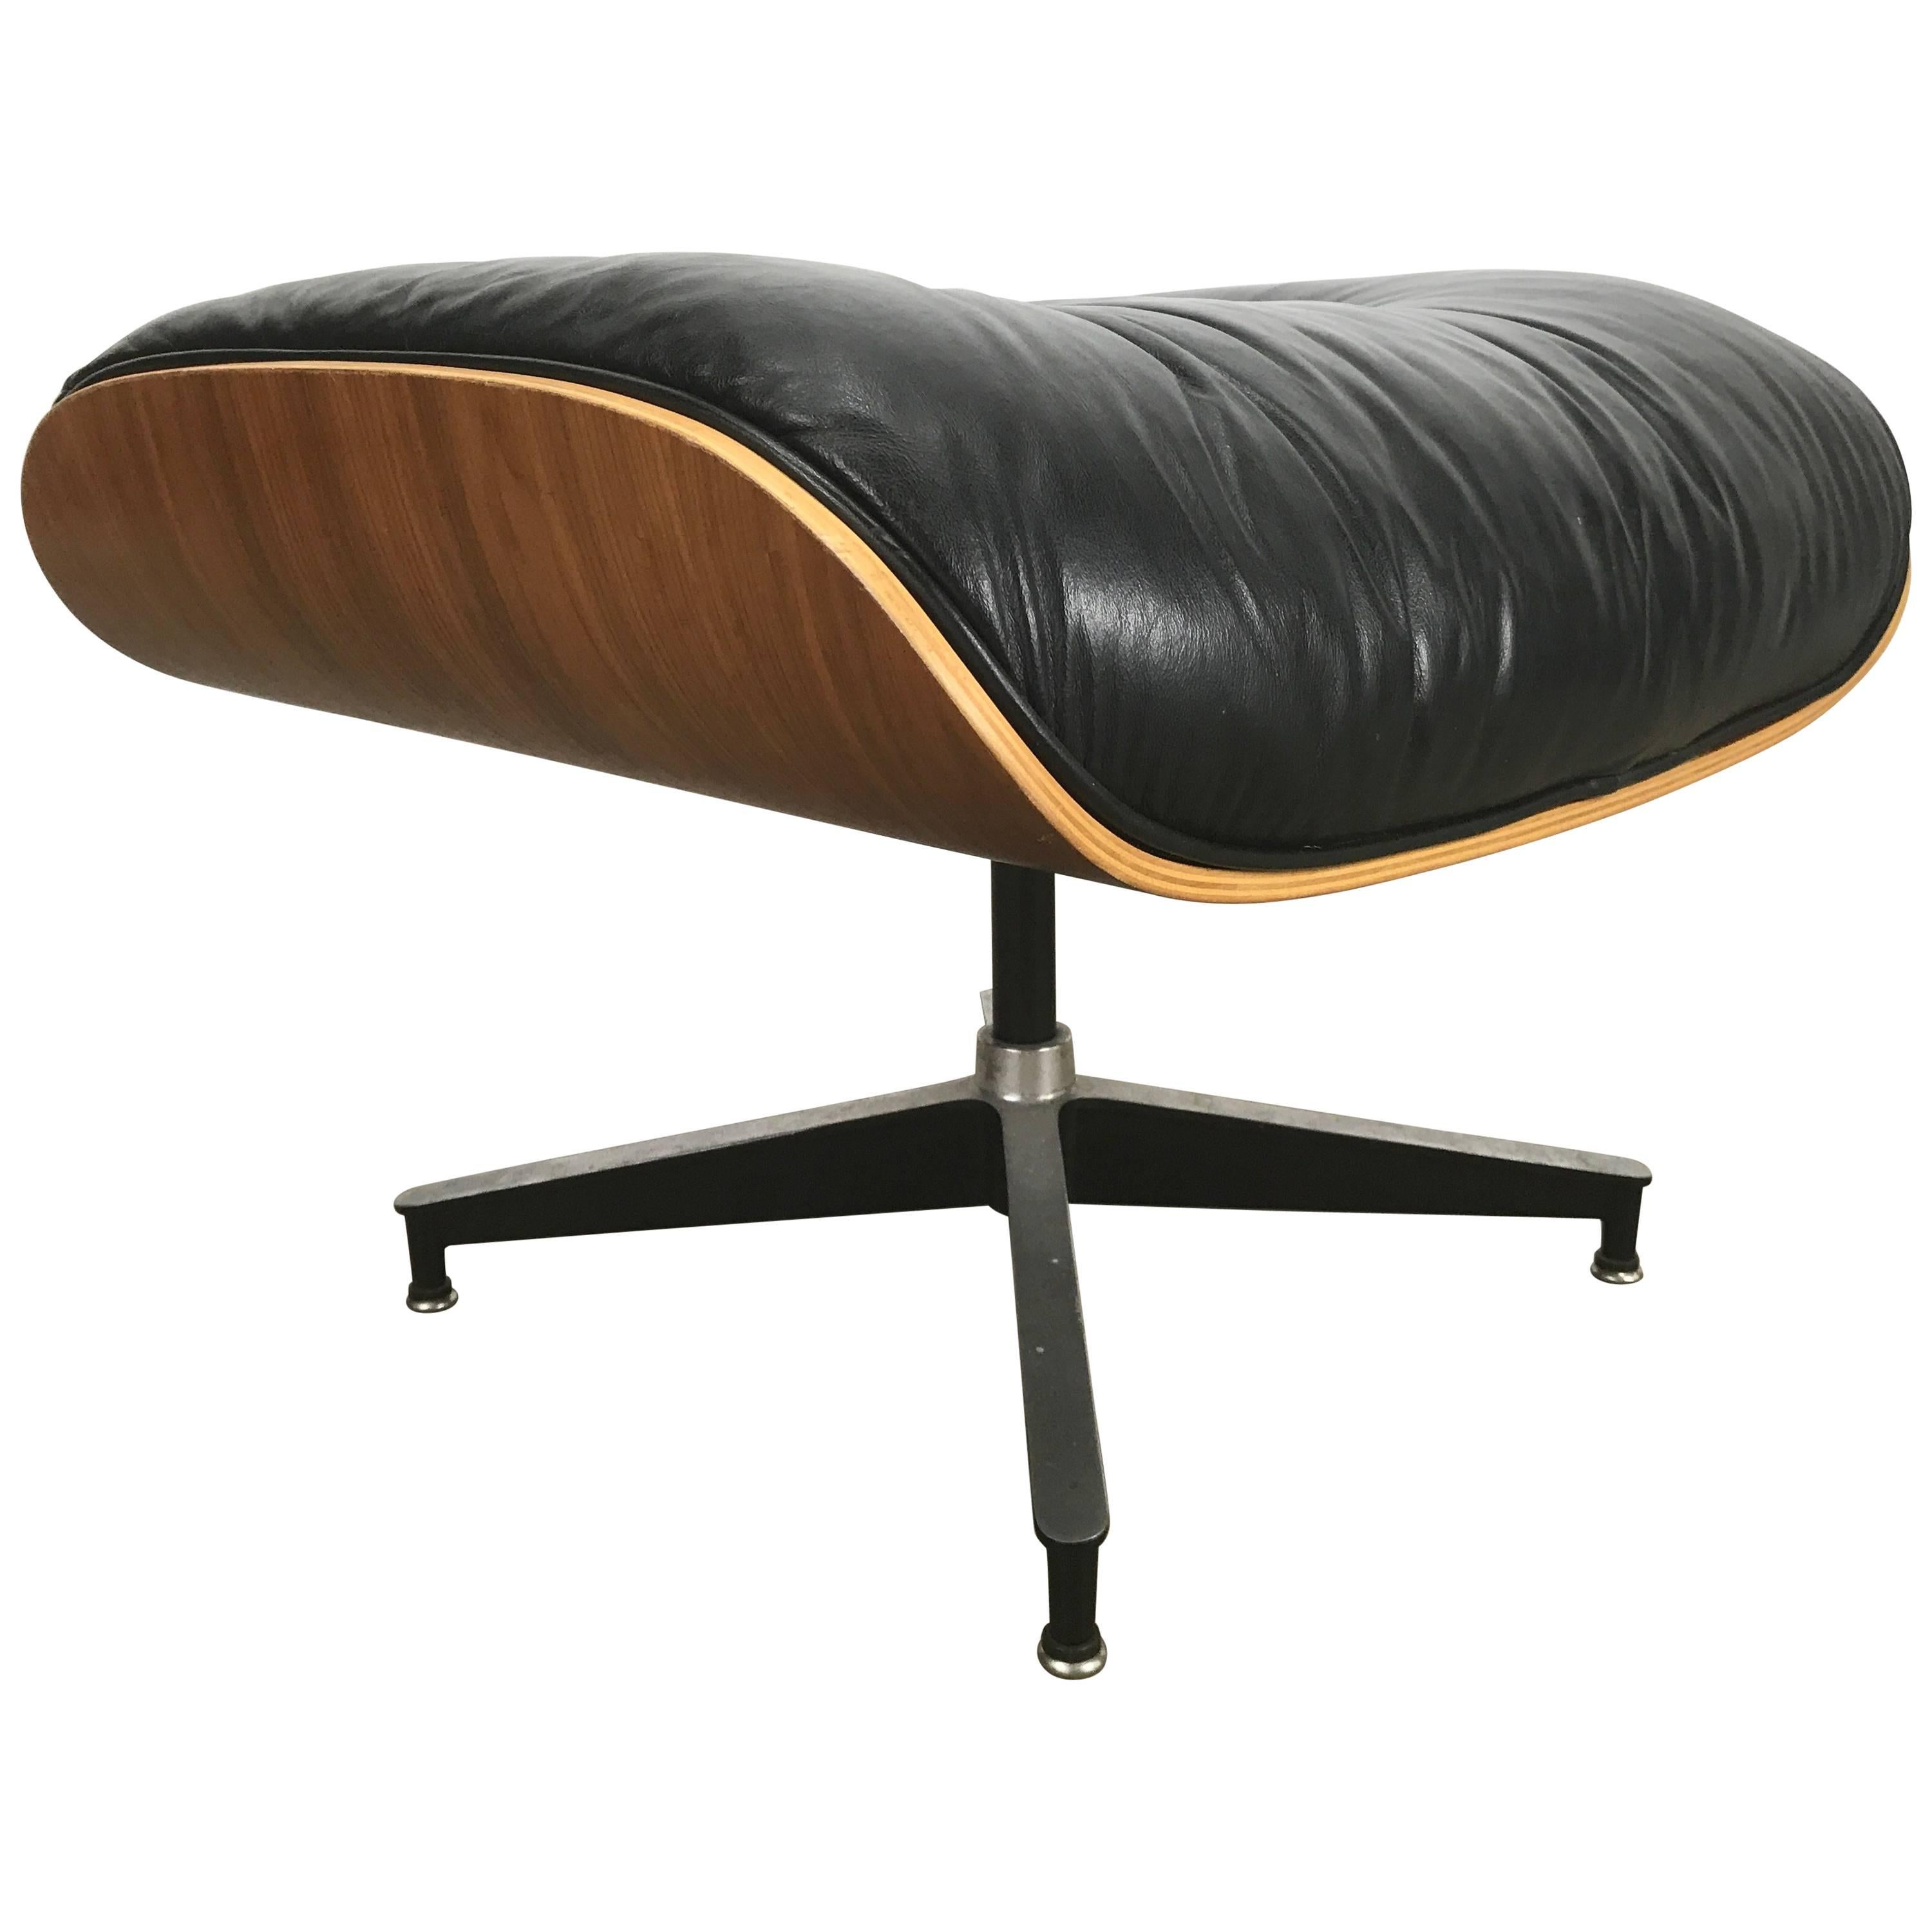 Classic Charles Eames 1970s Leather and Walnut 671 Ottoman, Herman Miller